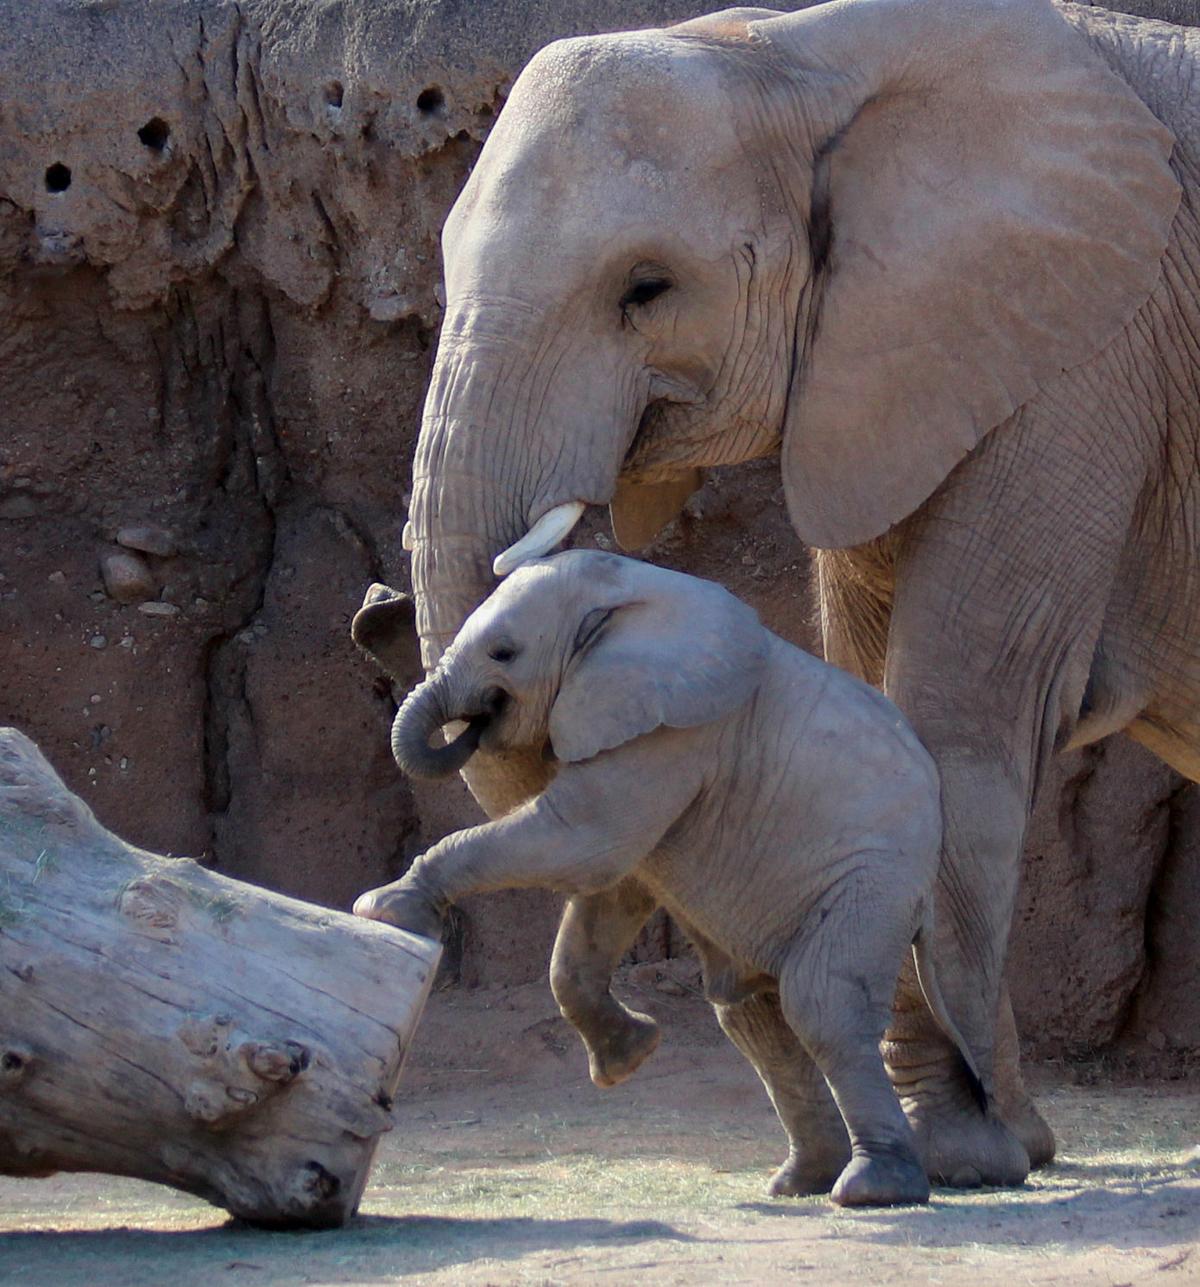 Tucson's baby elephant getting more brave, playing with big sister